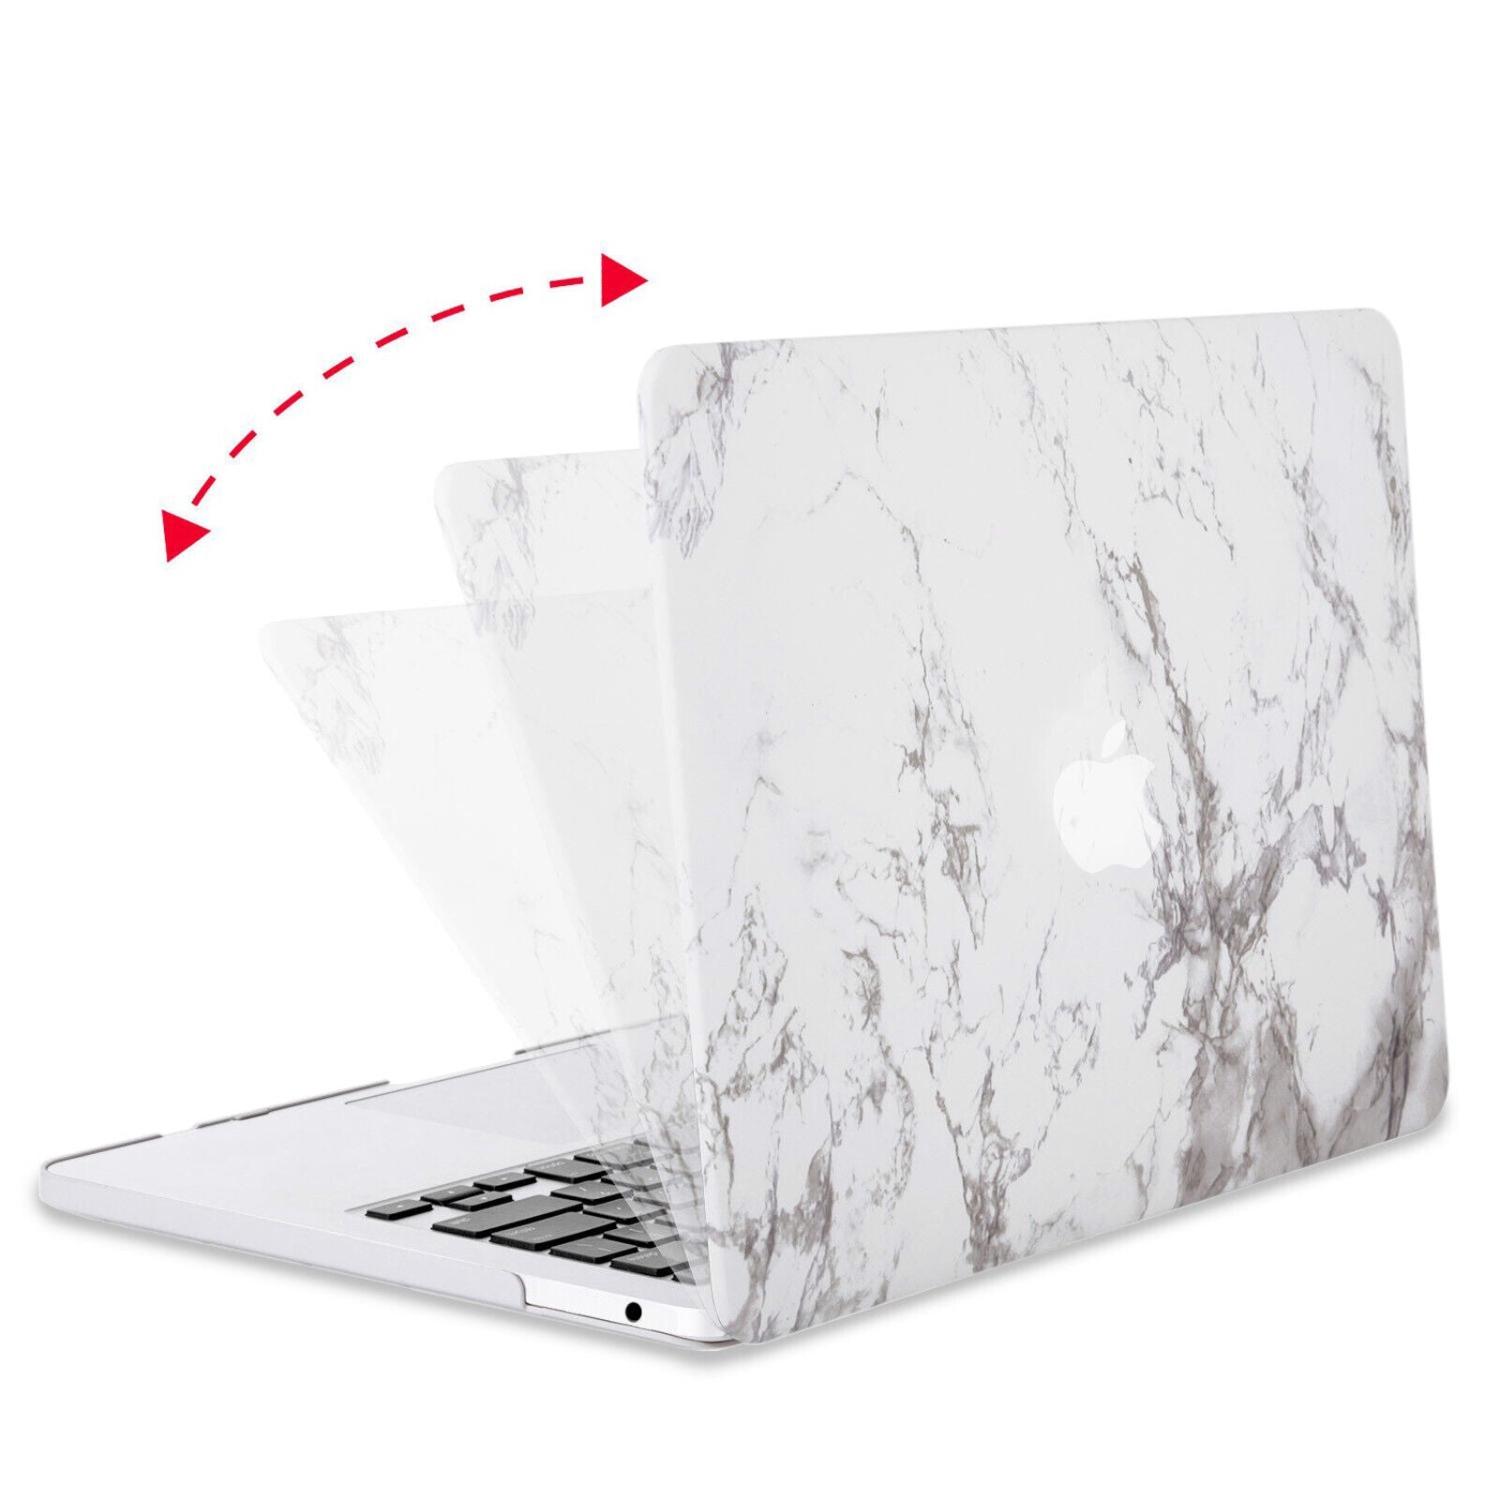 Soft-Touch Matte Plastic Hard Protective Case for MacBook Pro 13 inch 2019 A2159